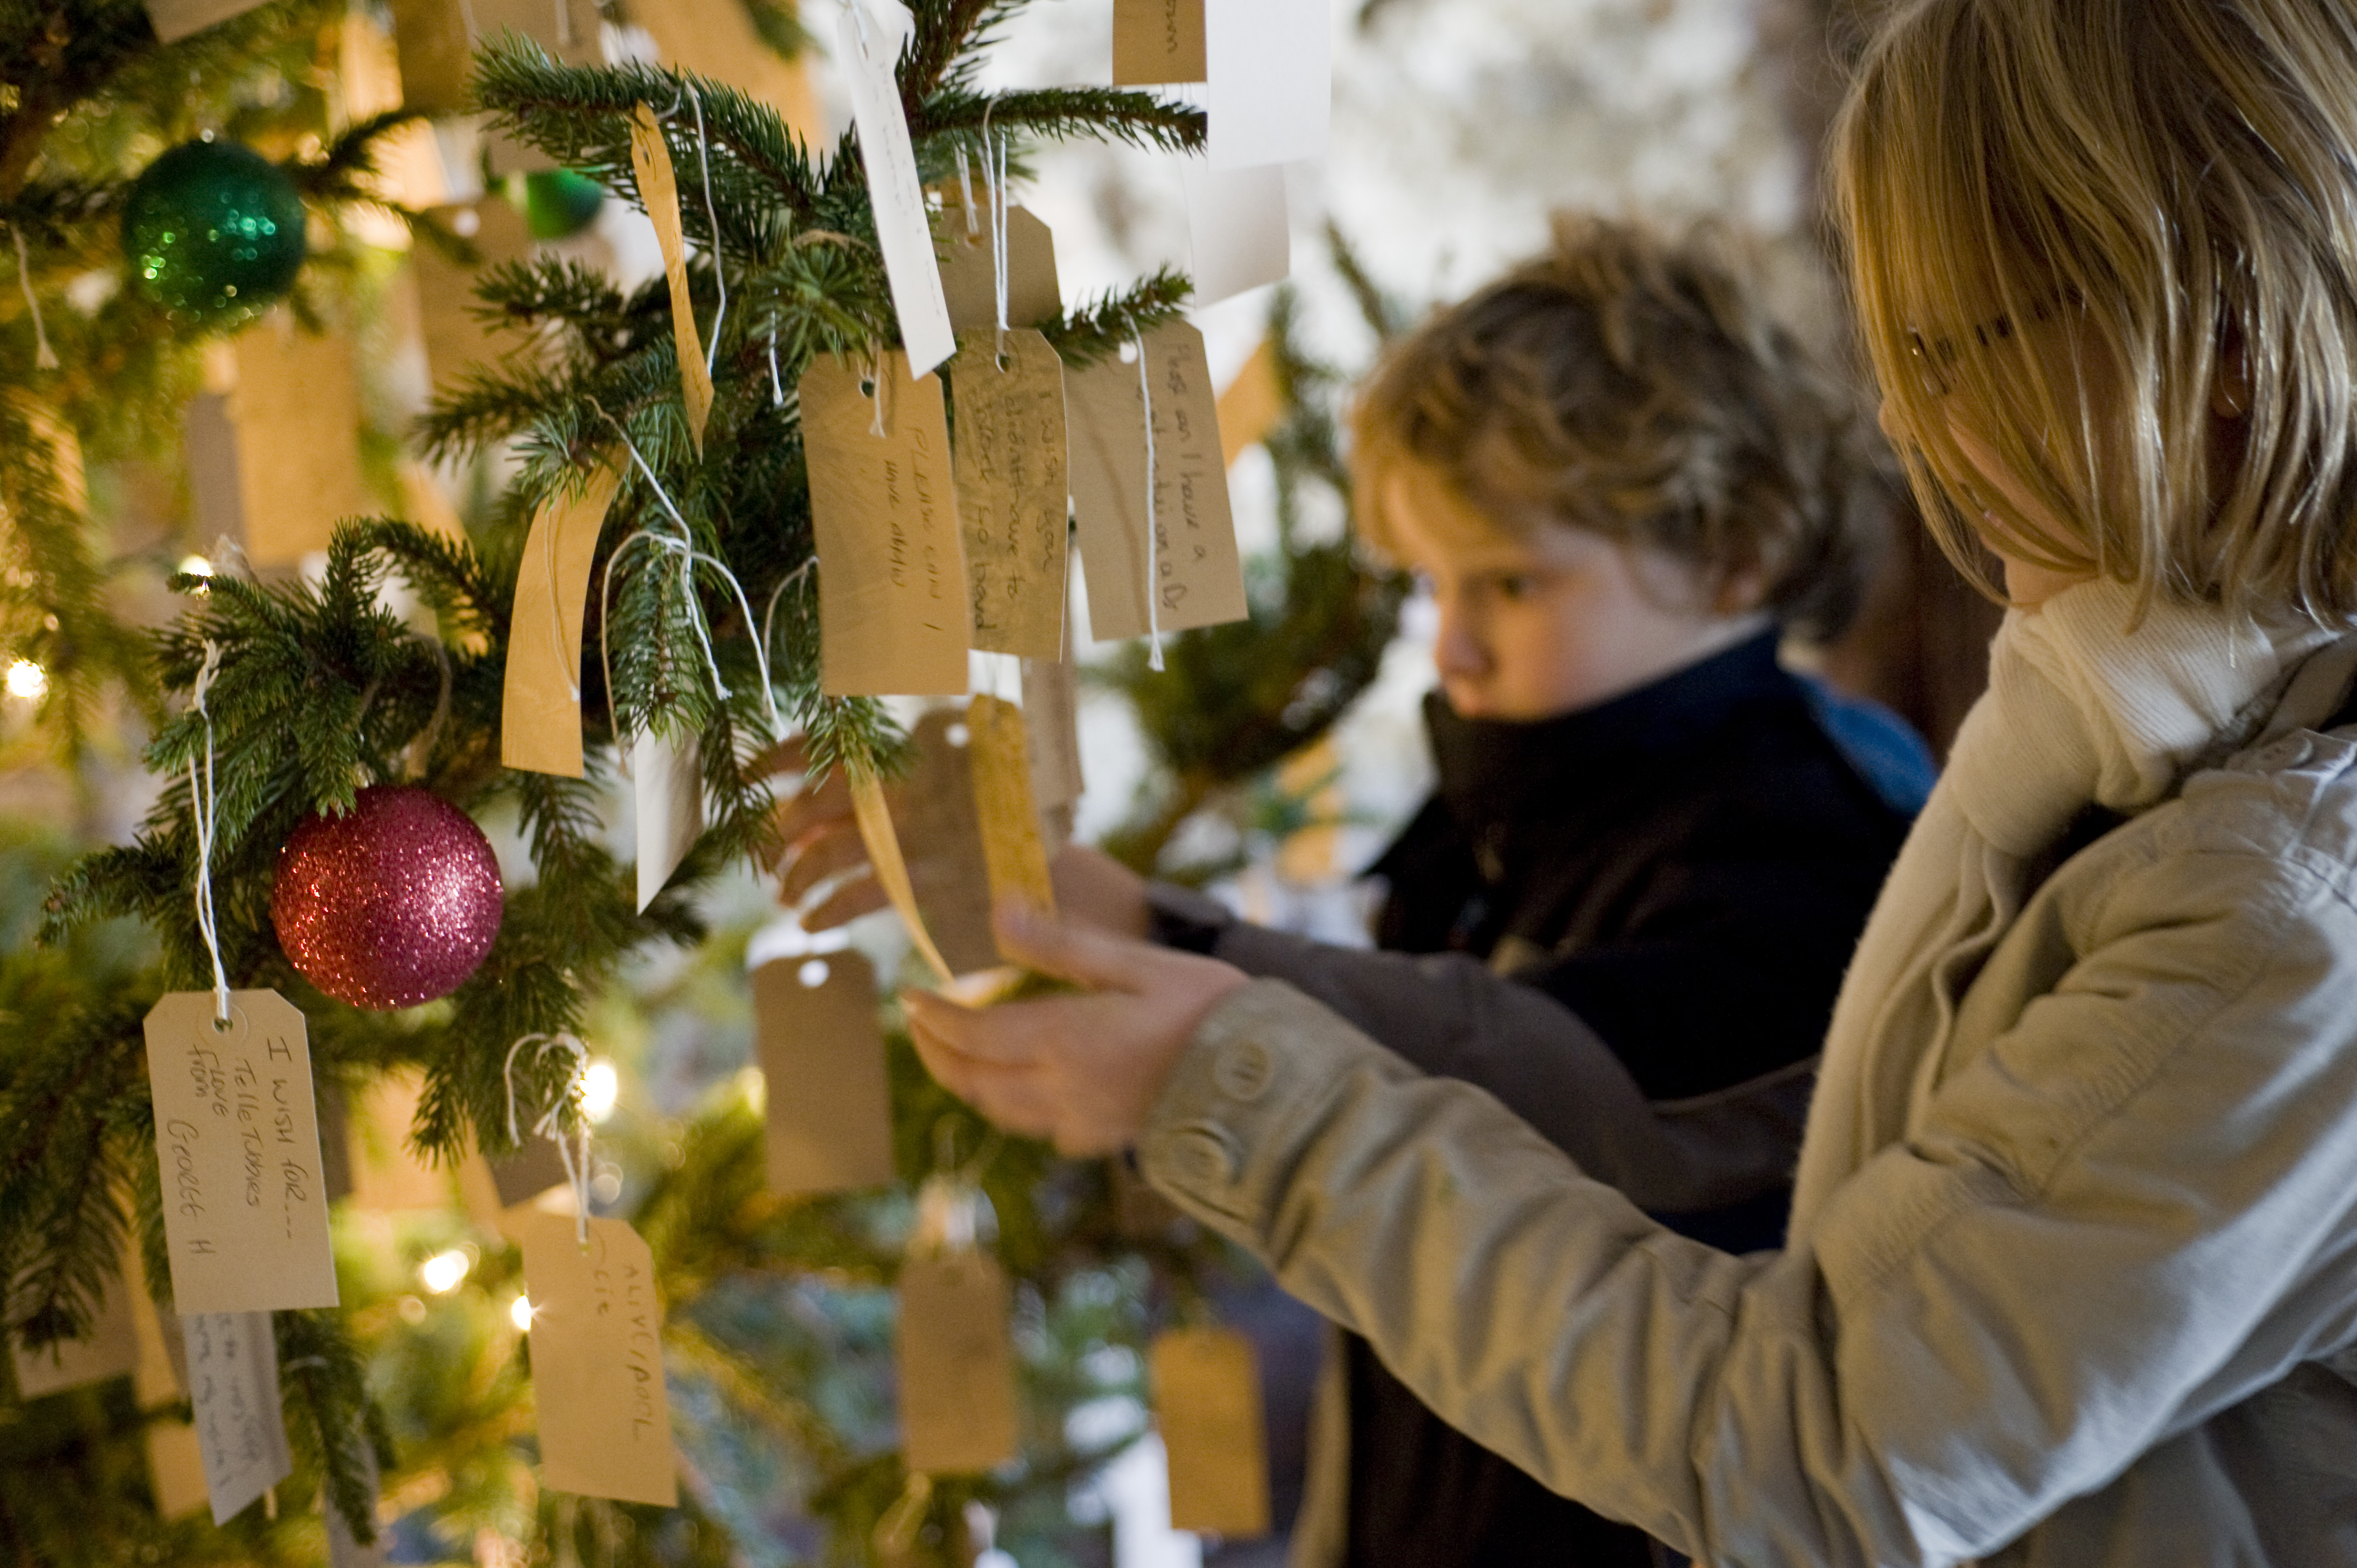 Children looking at the decorations and Christmas wishes on a tree at an event at Chirk Castle, Wrexham, Wales